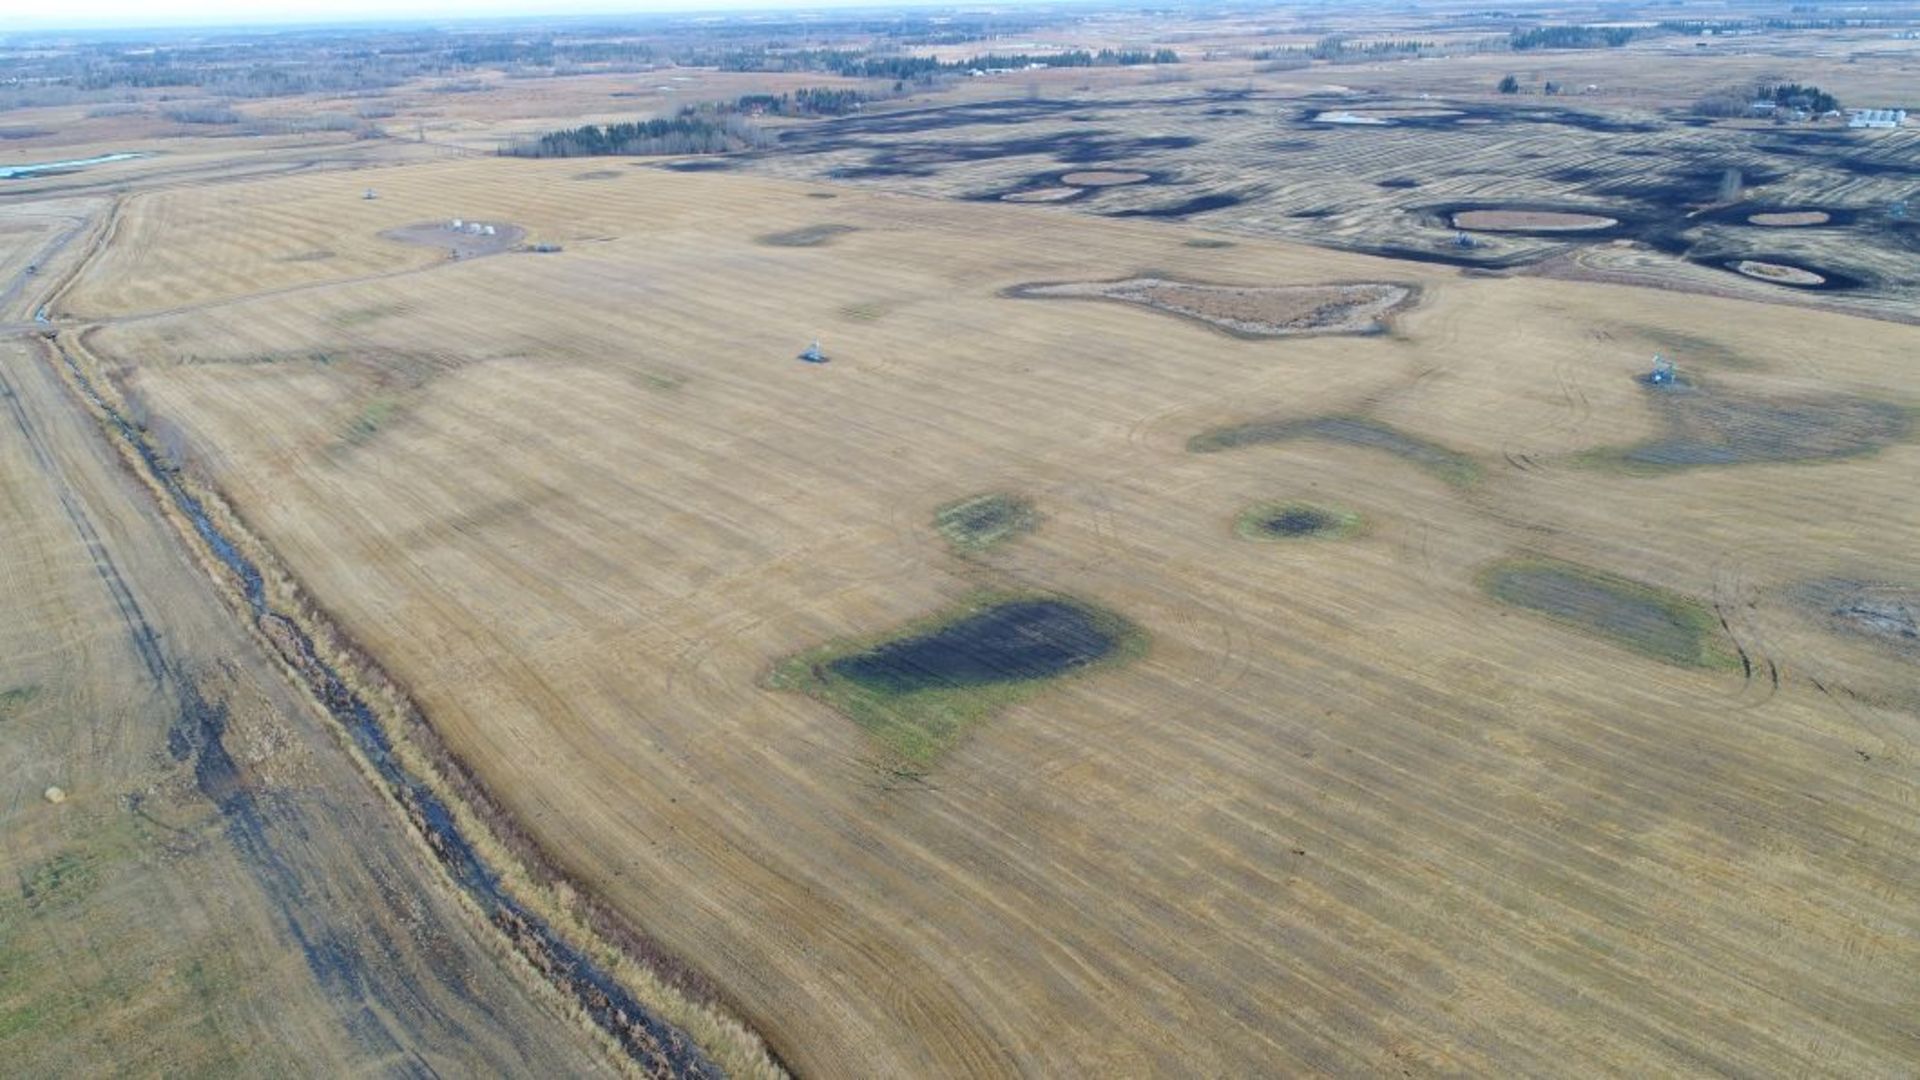 160+/- Total Acres NW 8-56-20-W4, Bruderheim, AB, consisting of Crop Land, Surface Lease & Yard Site - Image 12 of 34